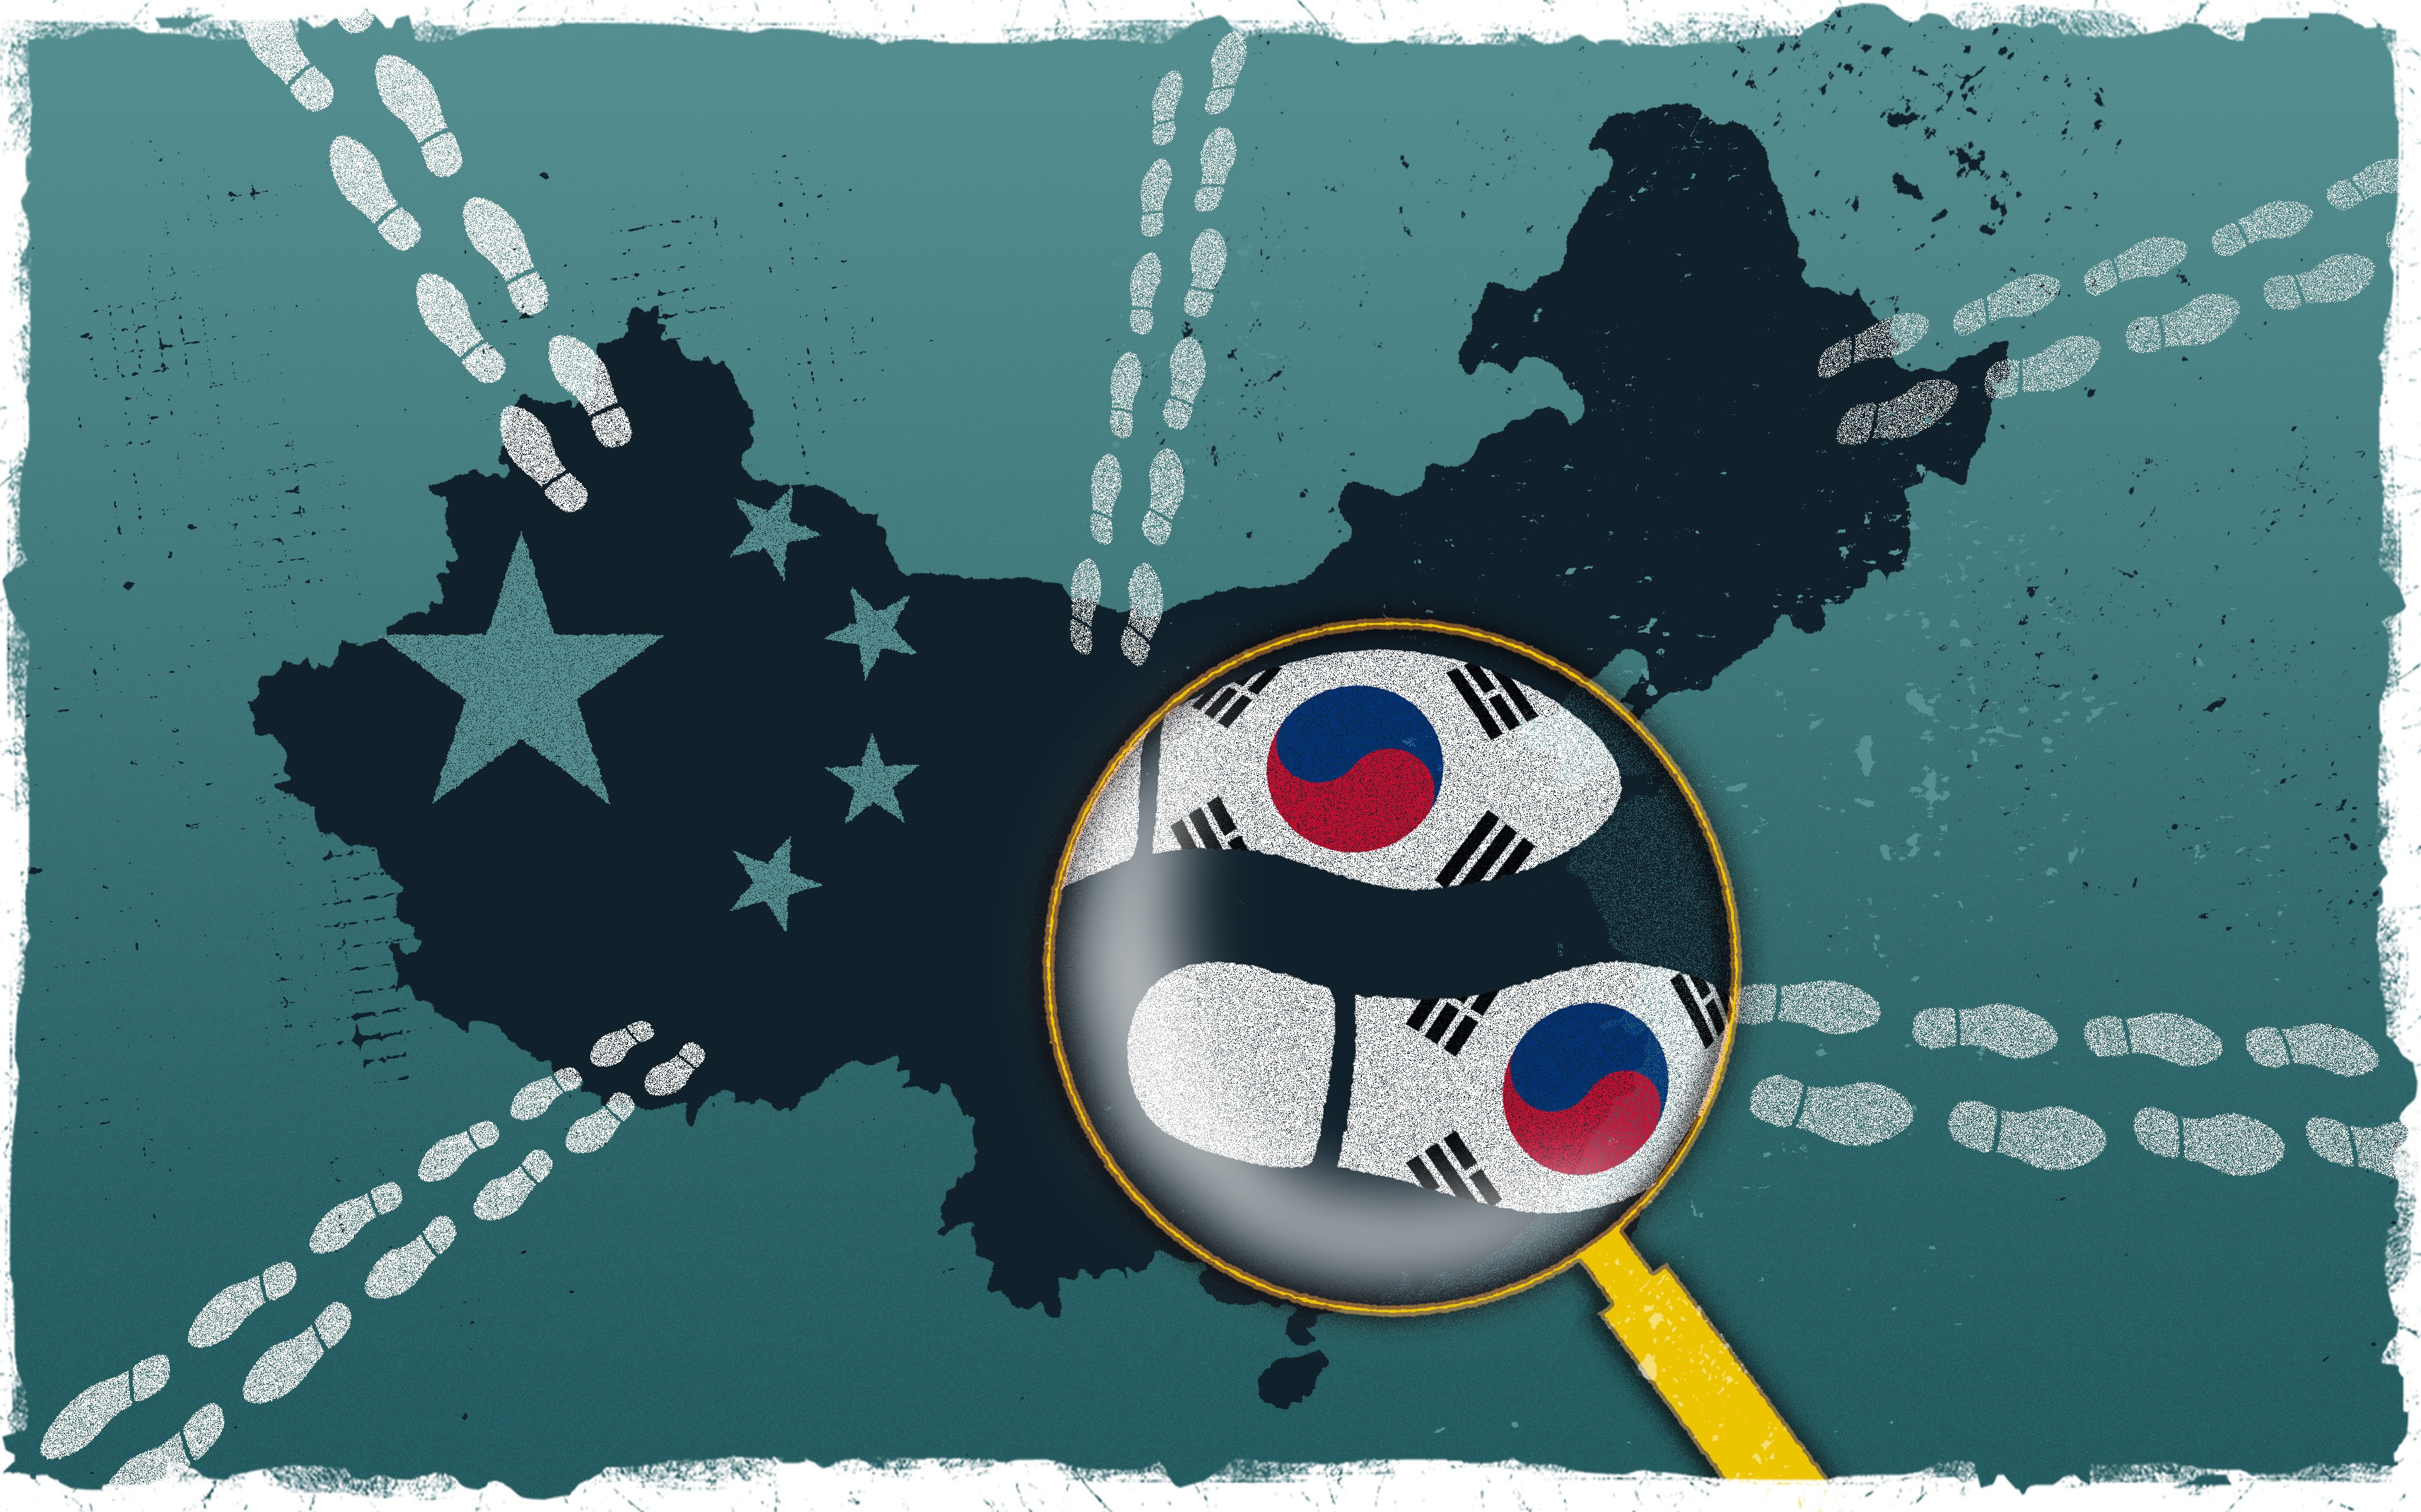 The likes of Samsung, Lotte, Kia and Hyundai are gradually winding down their China business due to political risks, tariffs and losing market share. Illustration: Lau Ka-kuen